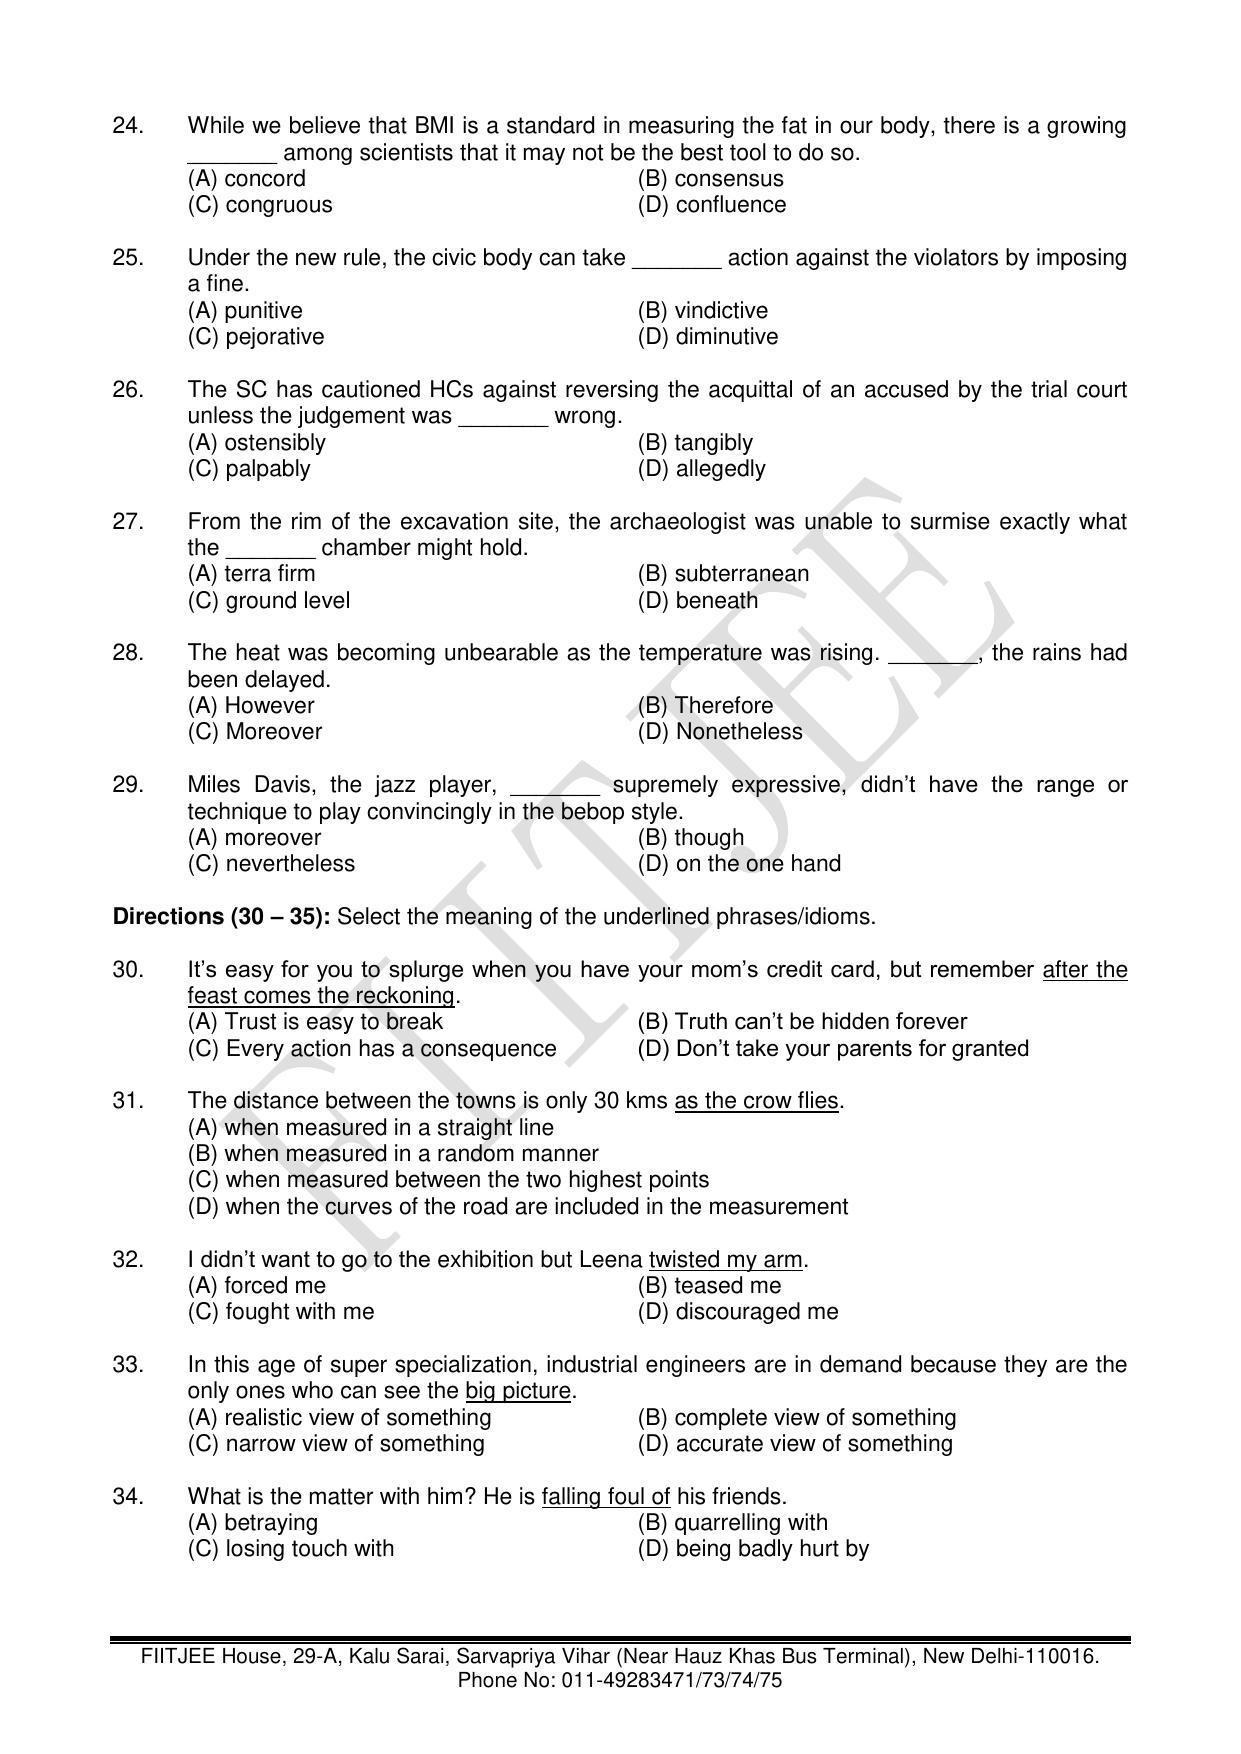 NTSE 2017 (Stage II) Language (LCT) Question Paper (May 14, 2017) - Page 6